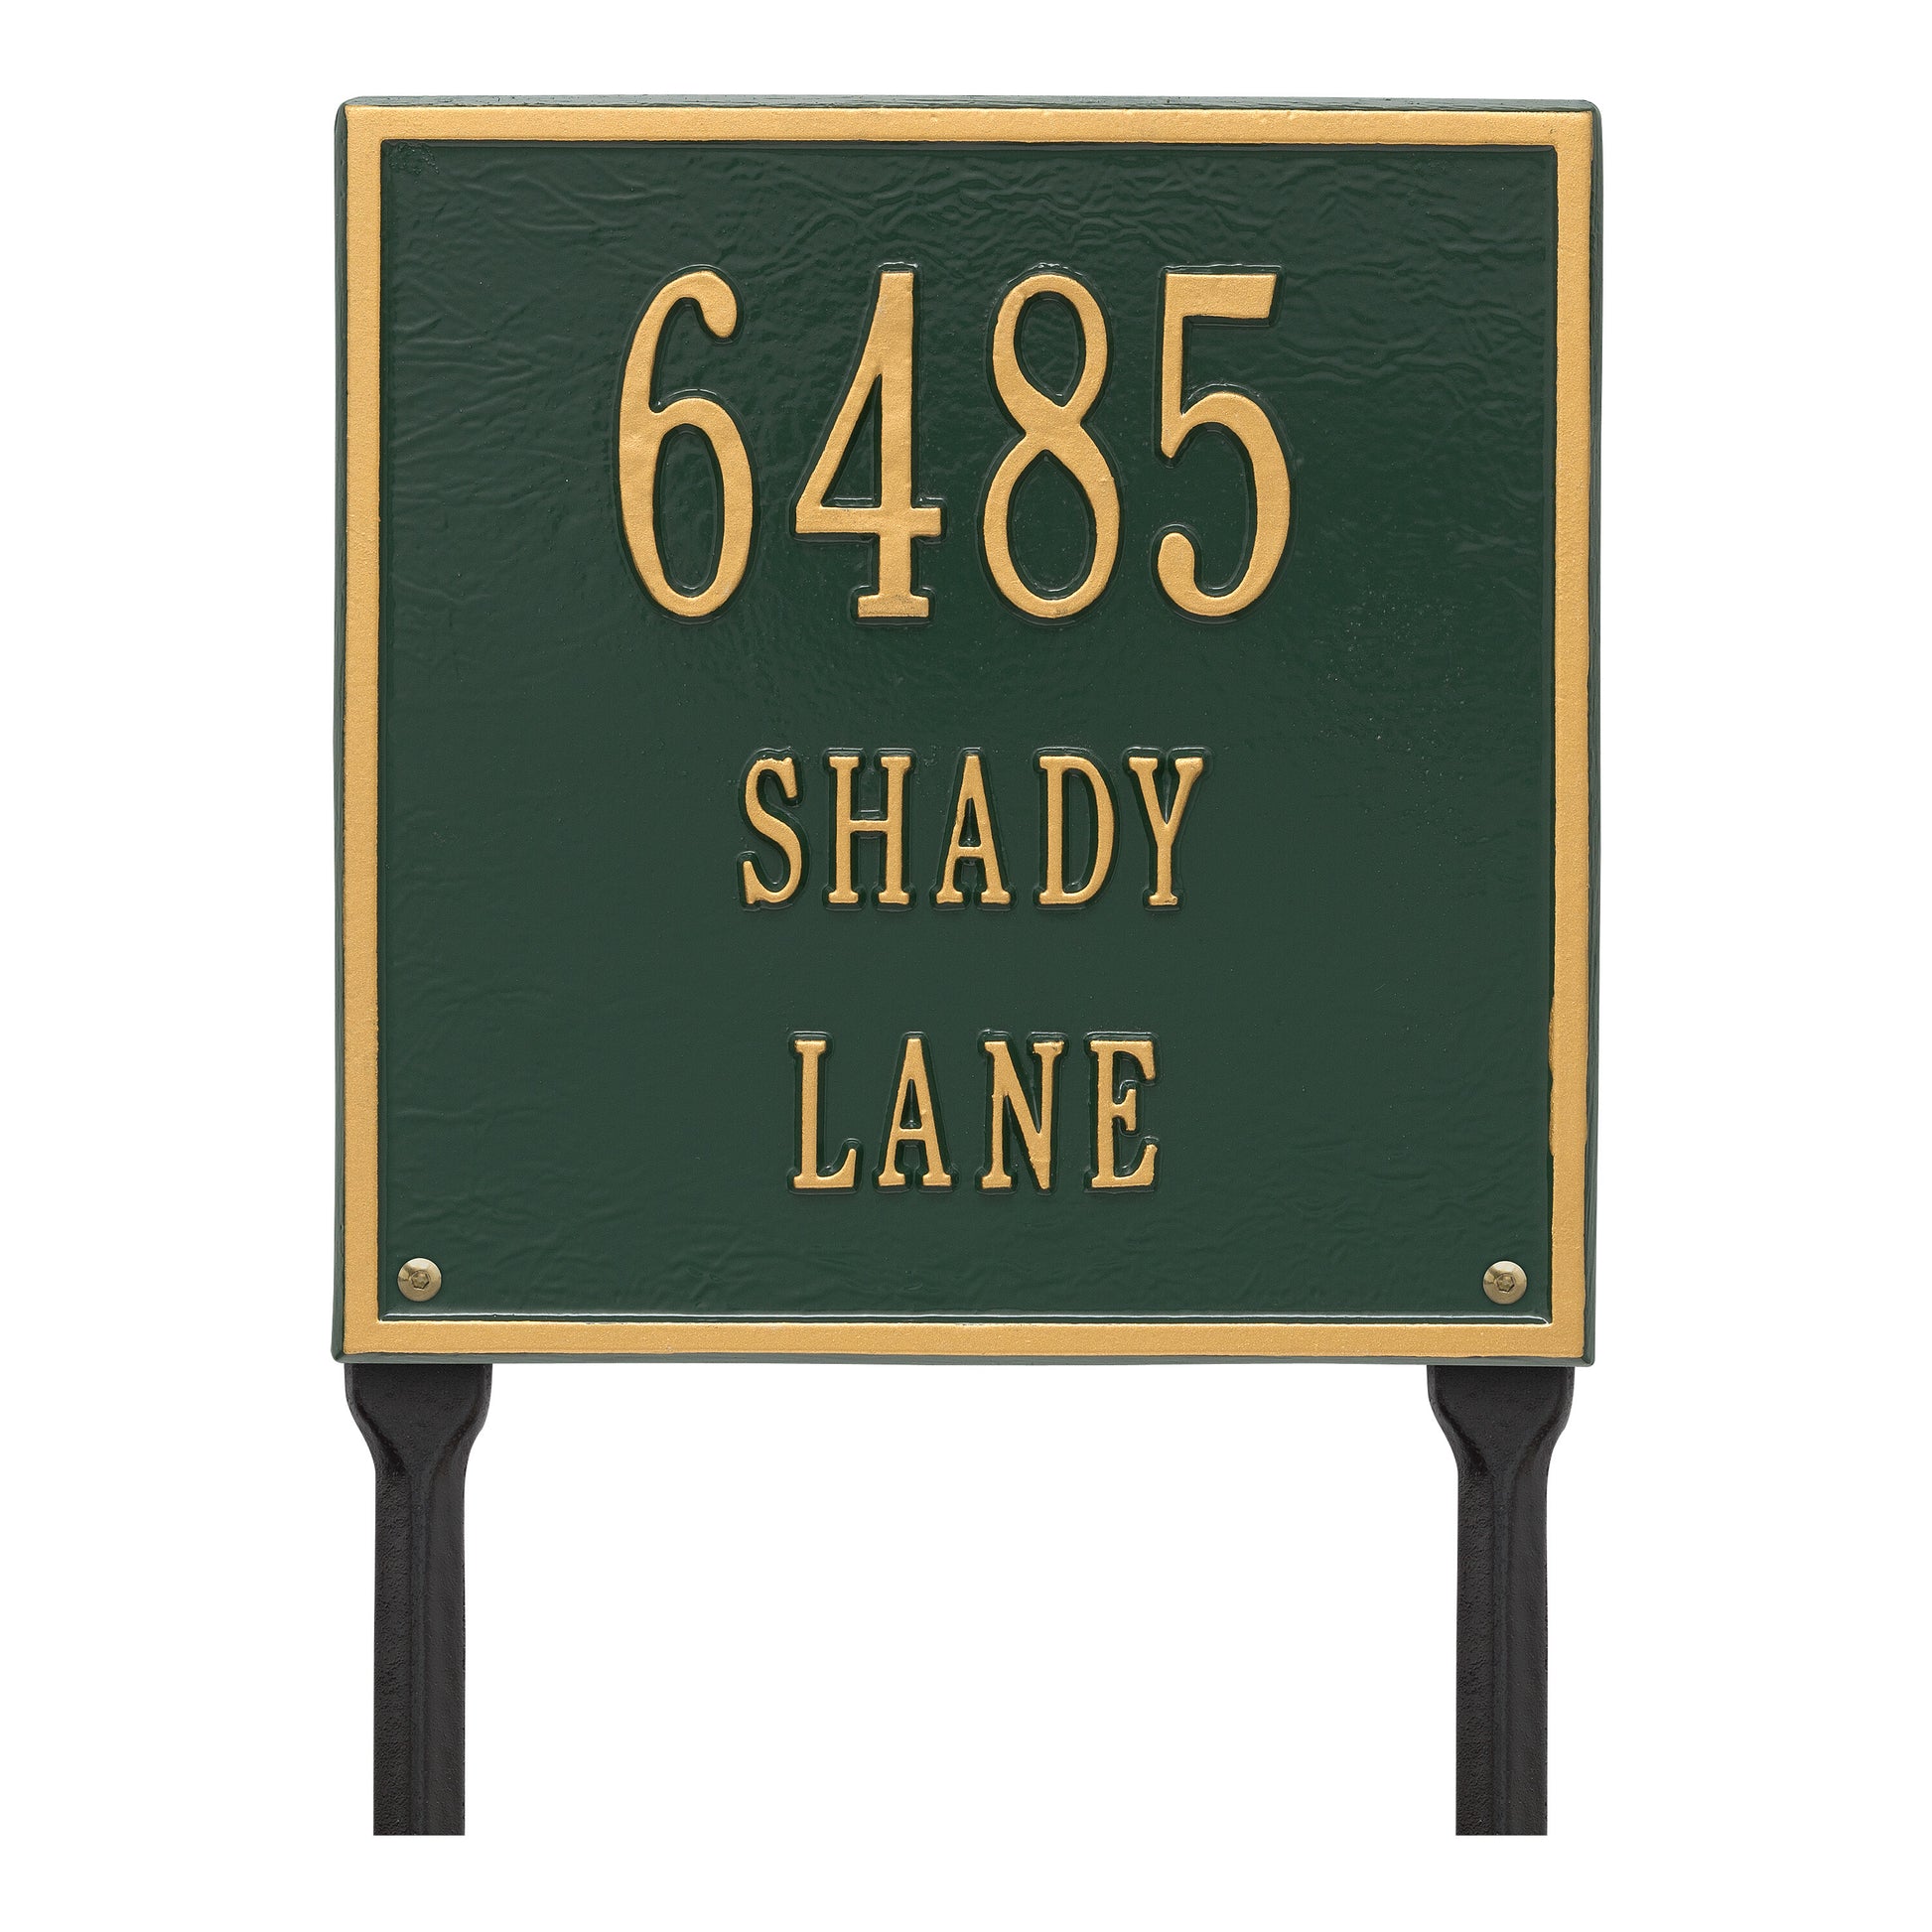 Whitehall Products Personalized Square Standard Lawn Plaque Three Line Oil Rubbed Bronze